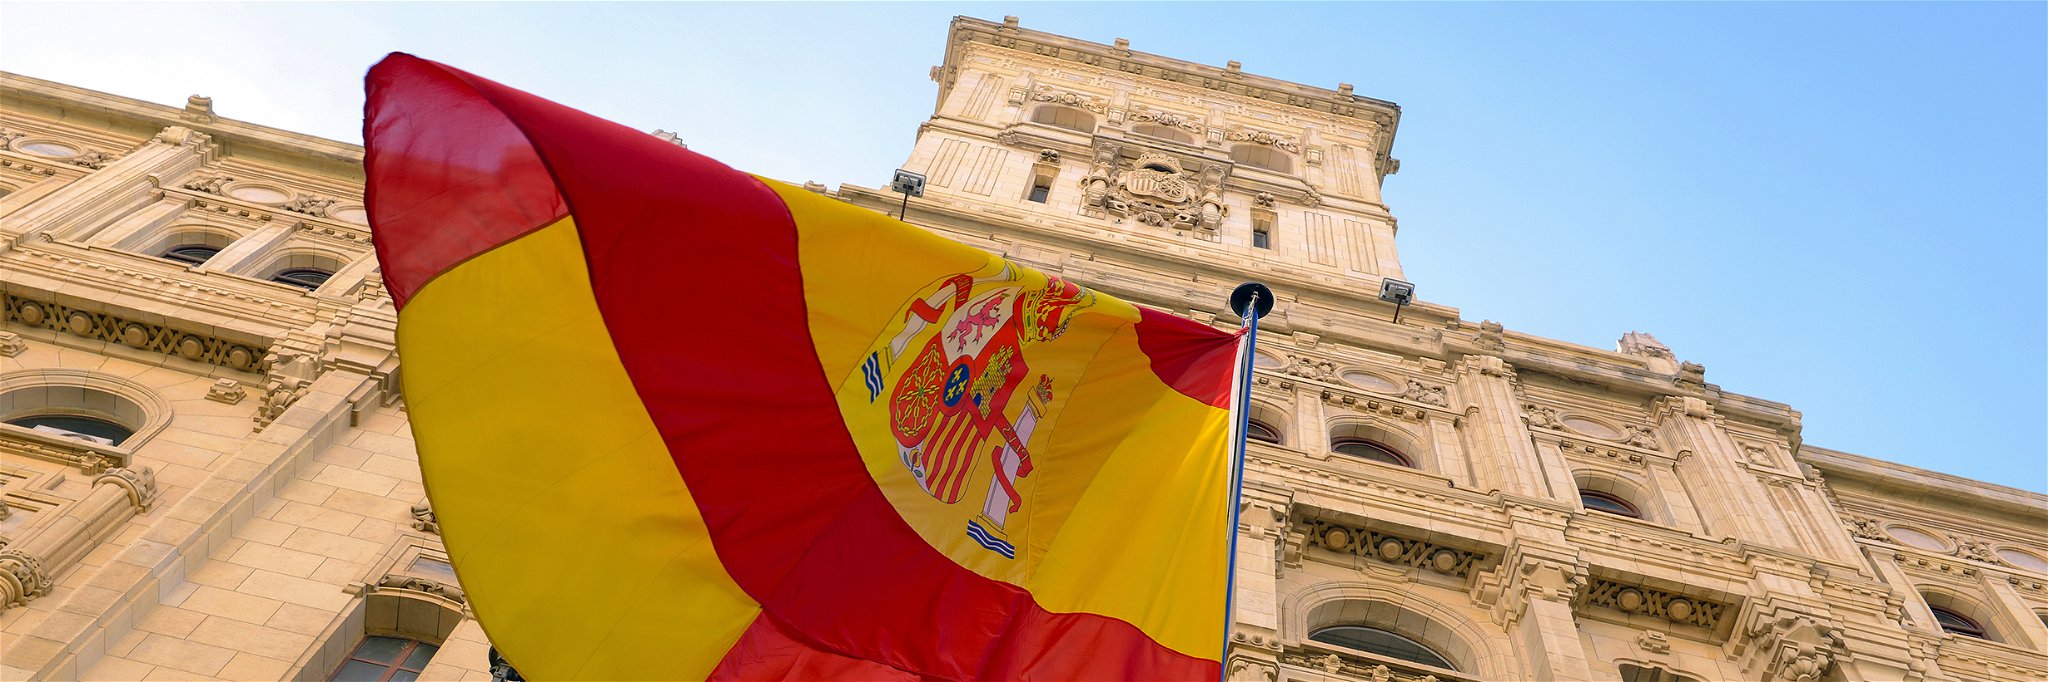 Demonstrations and political gatherings may take place in Spain, the UK Foreign Office warns.